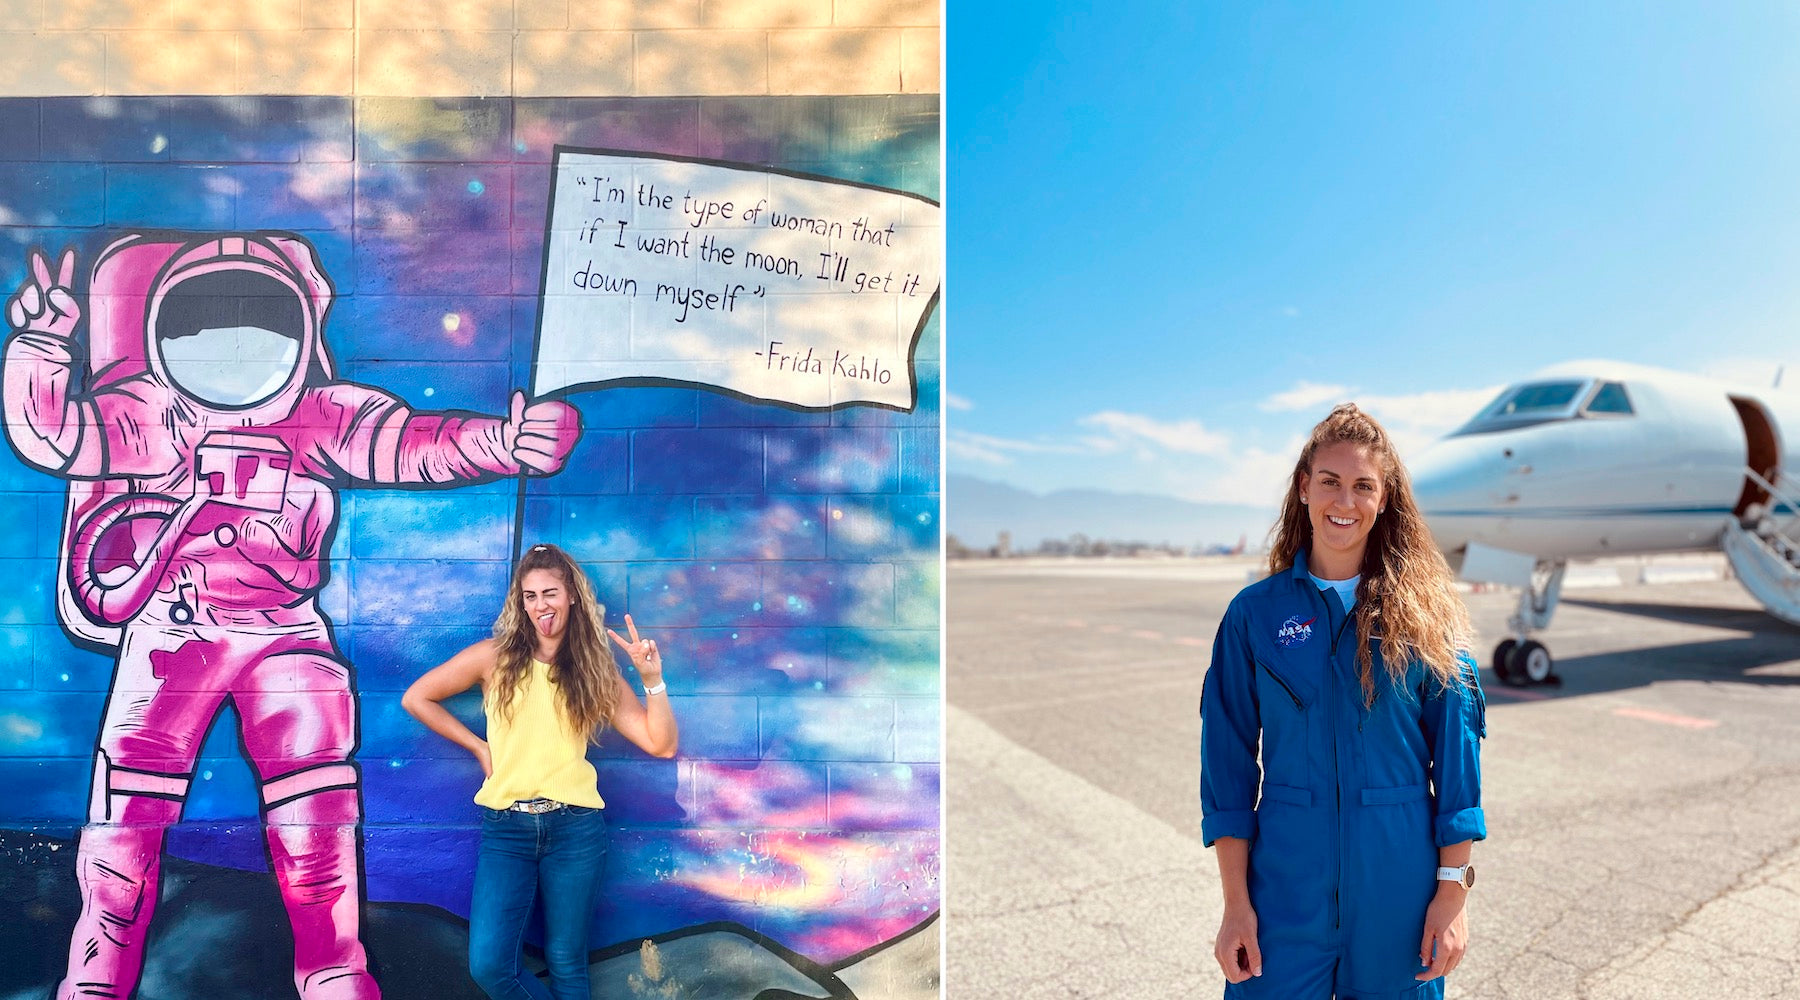 Kate Gunderson wants to be an astronaut